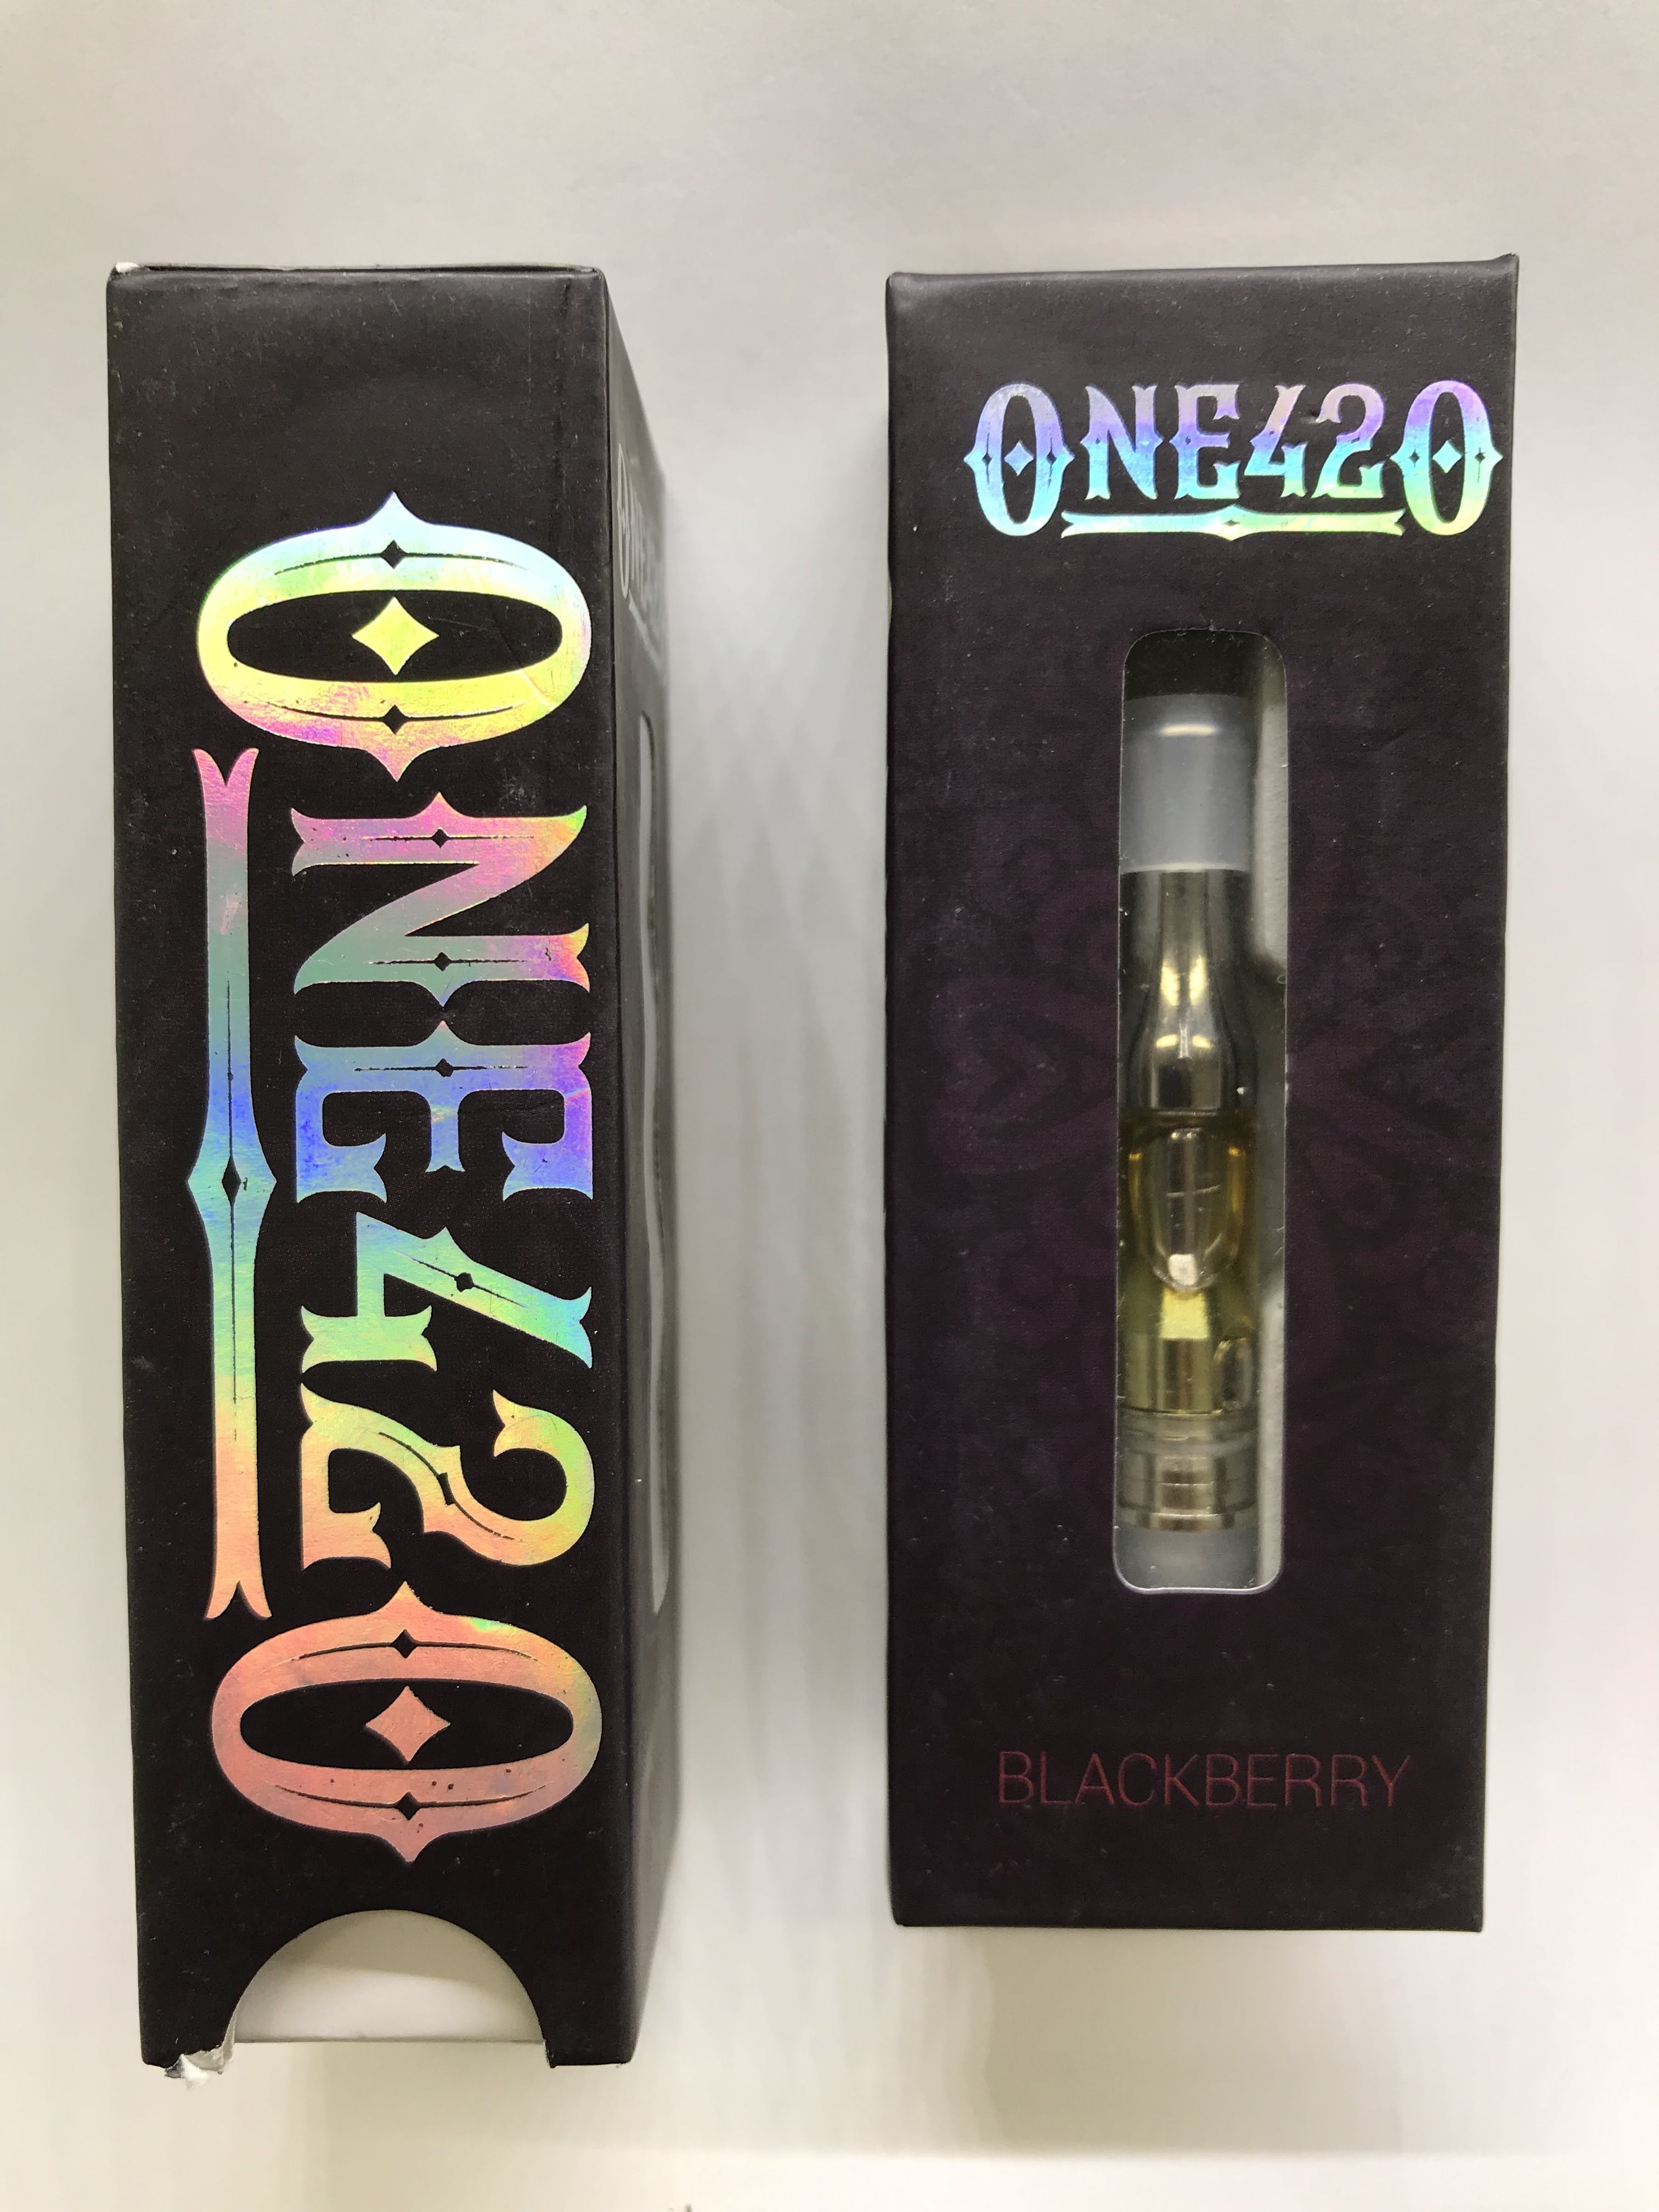 concentrate-one420-sativa-cartridges